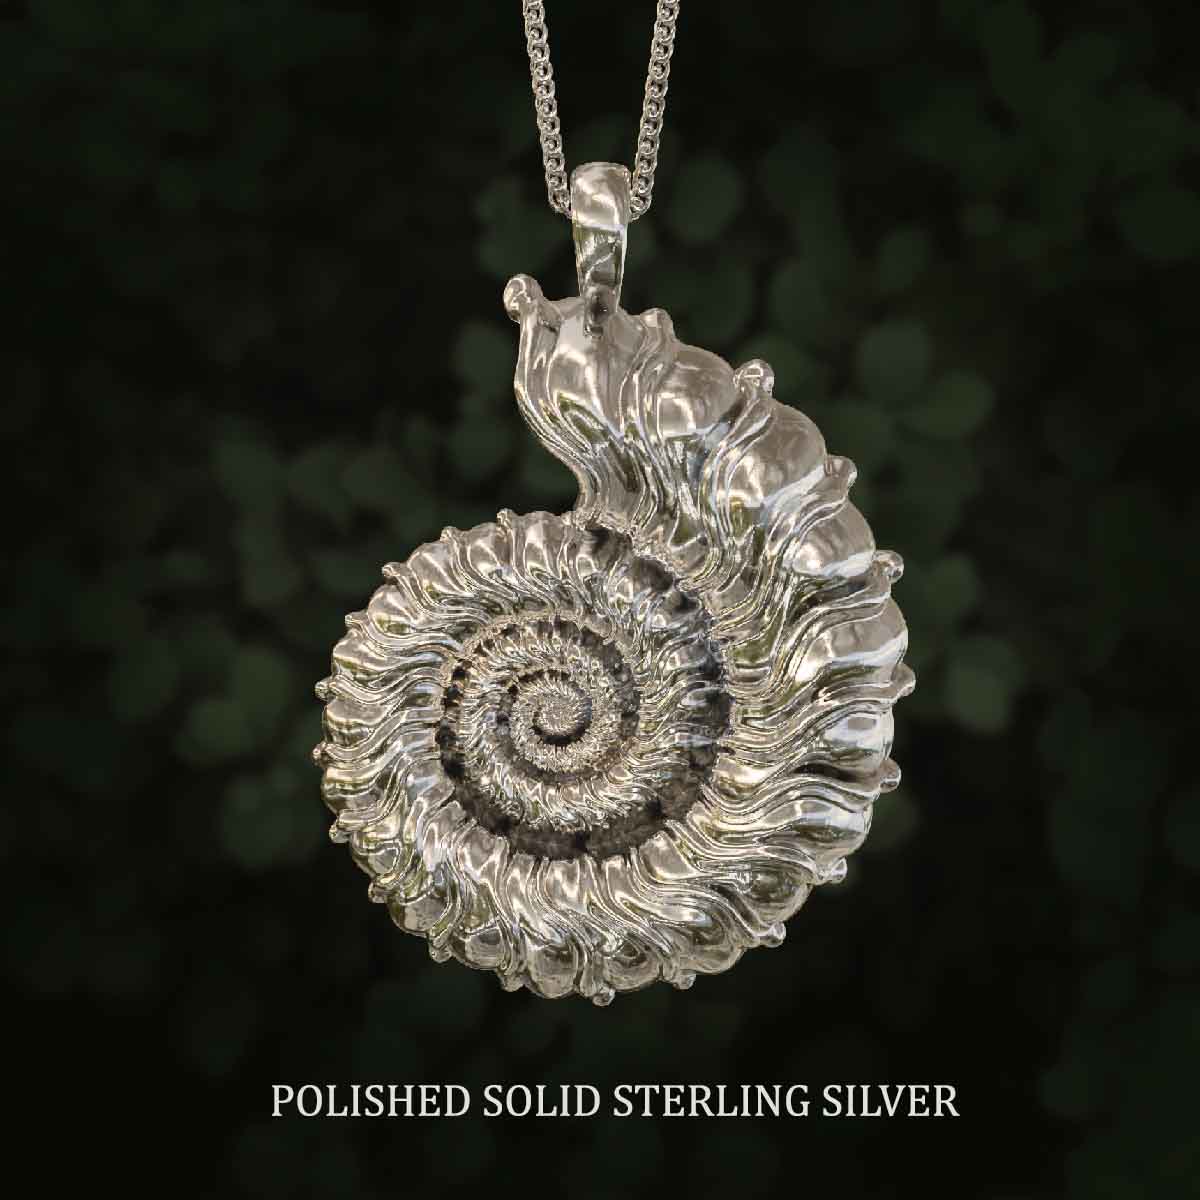 Polished-925-Sterling-Silver-Ammonite-Pendant-Jewelry-For-Necklace